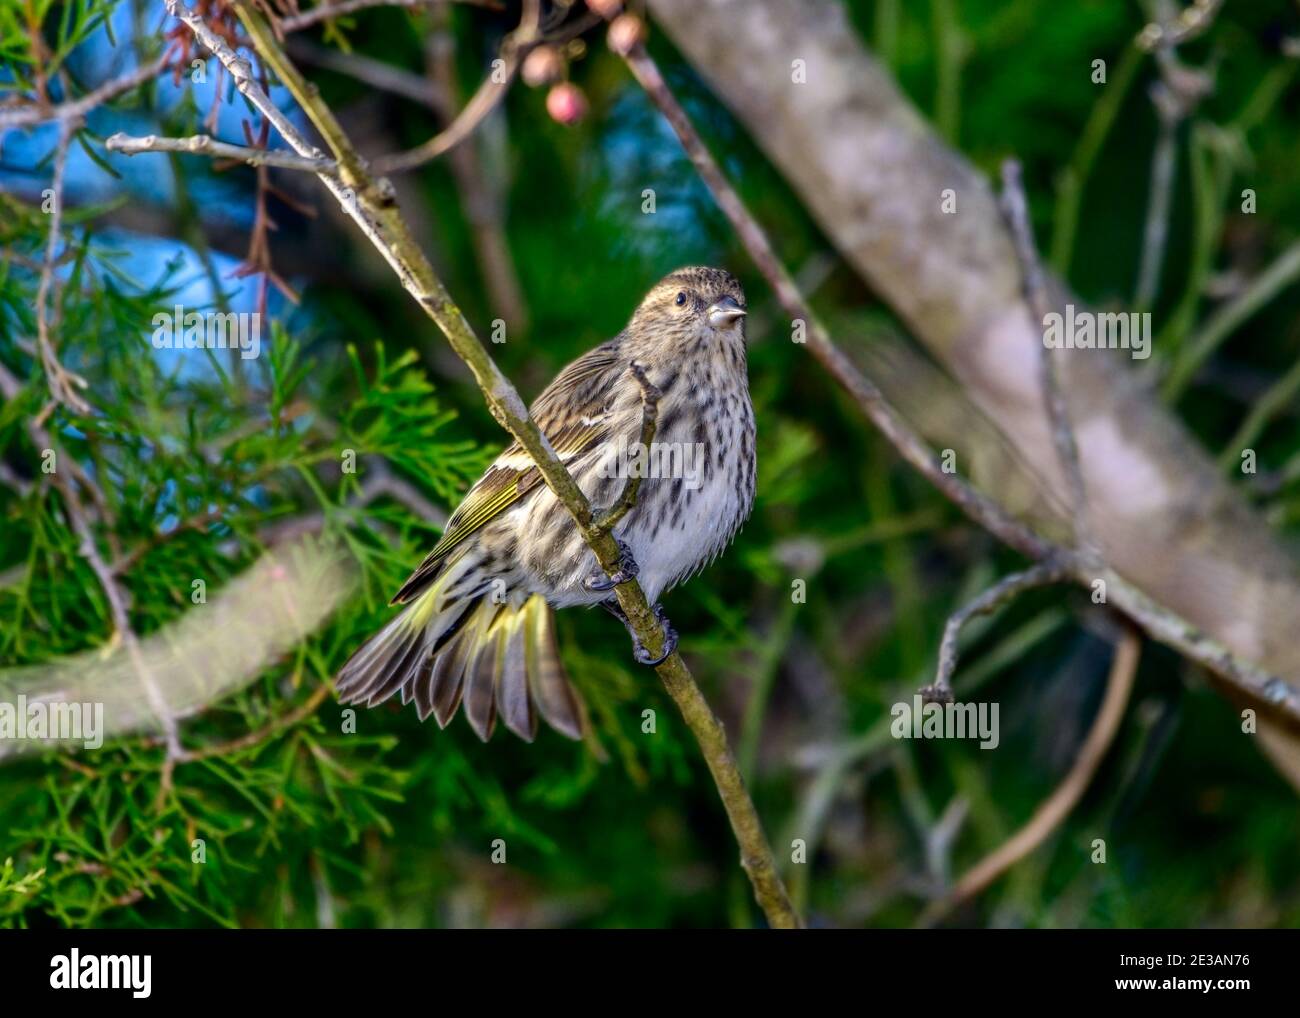 Pine Siskin - Spinus pinus - perched on a branch. with its tail fanned green foliage background Stock Photo